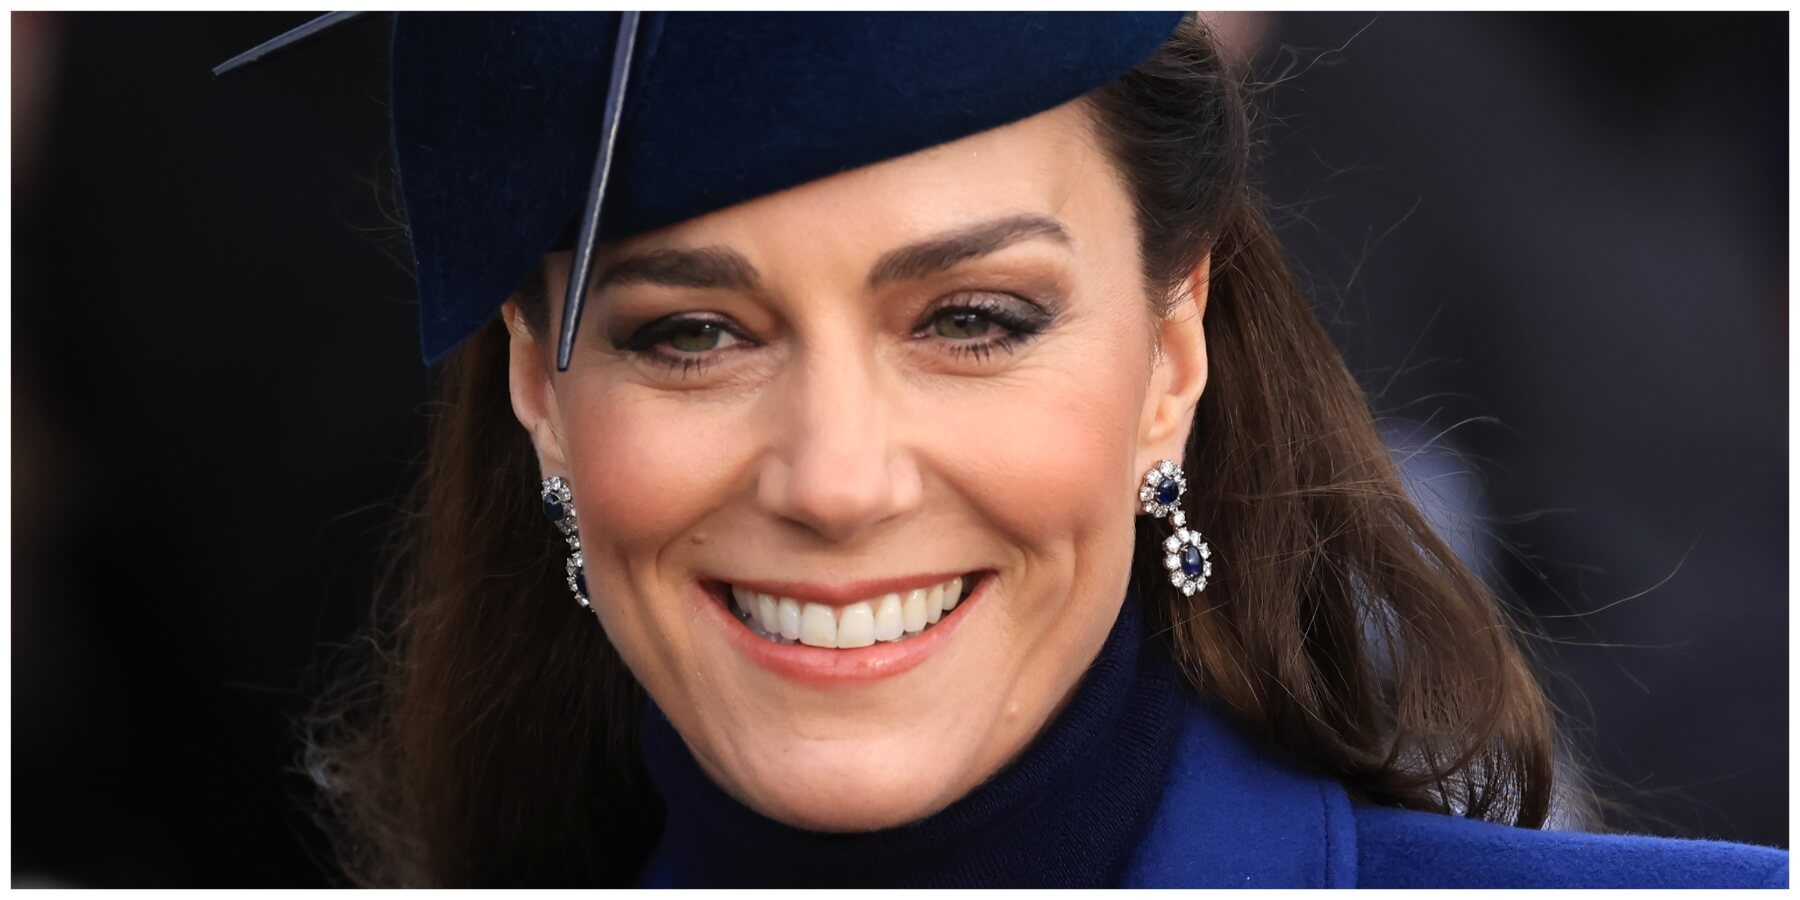 After attending church with the royal family, Kate Middleton was photographed on Dec. 25, 2023.